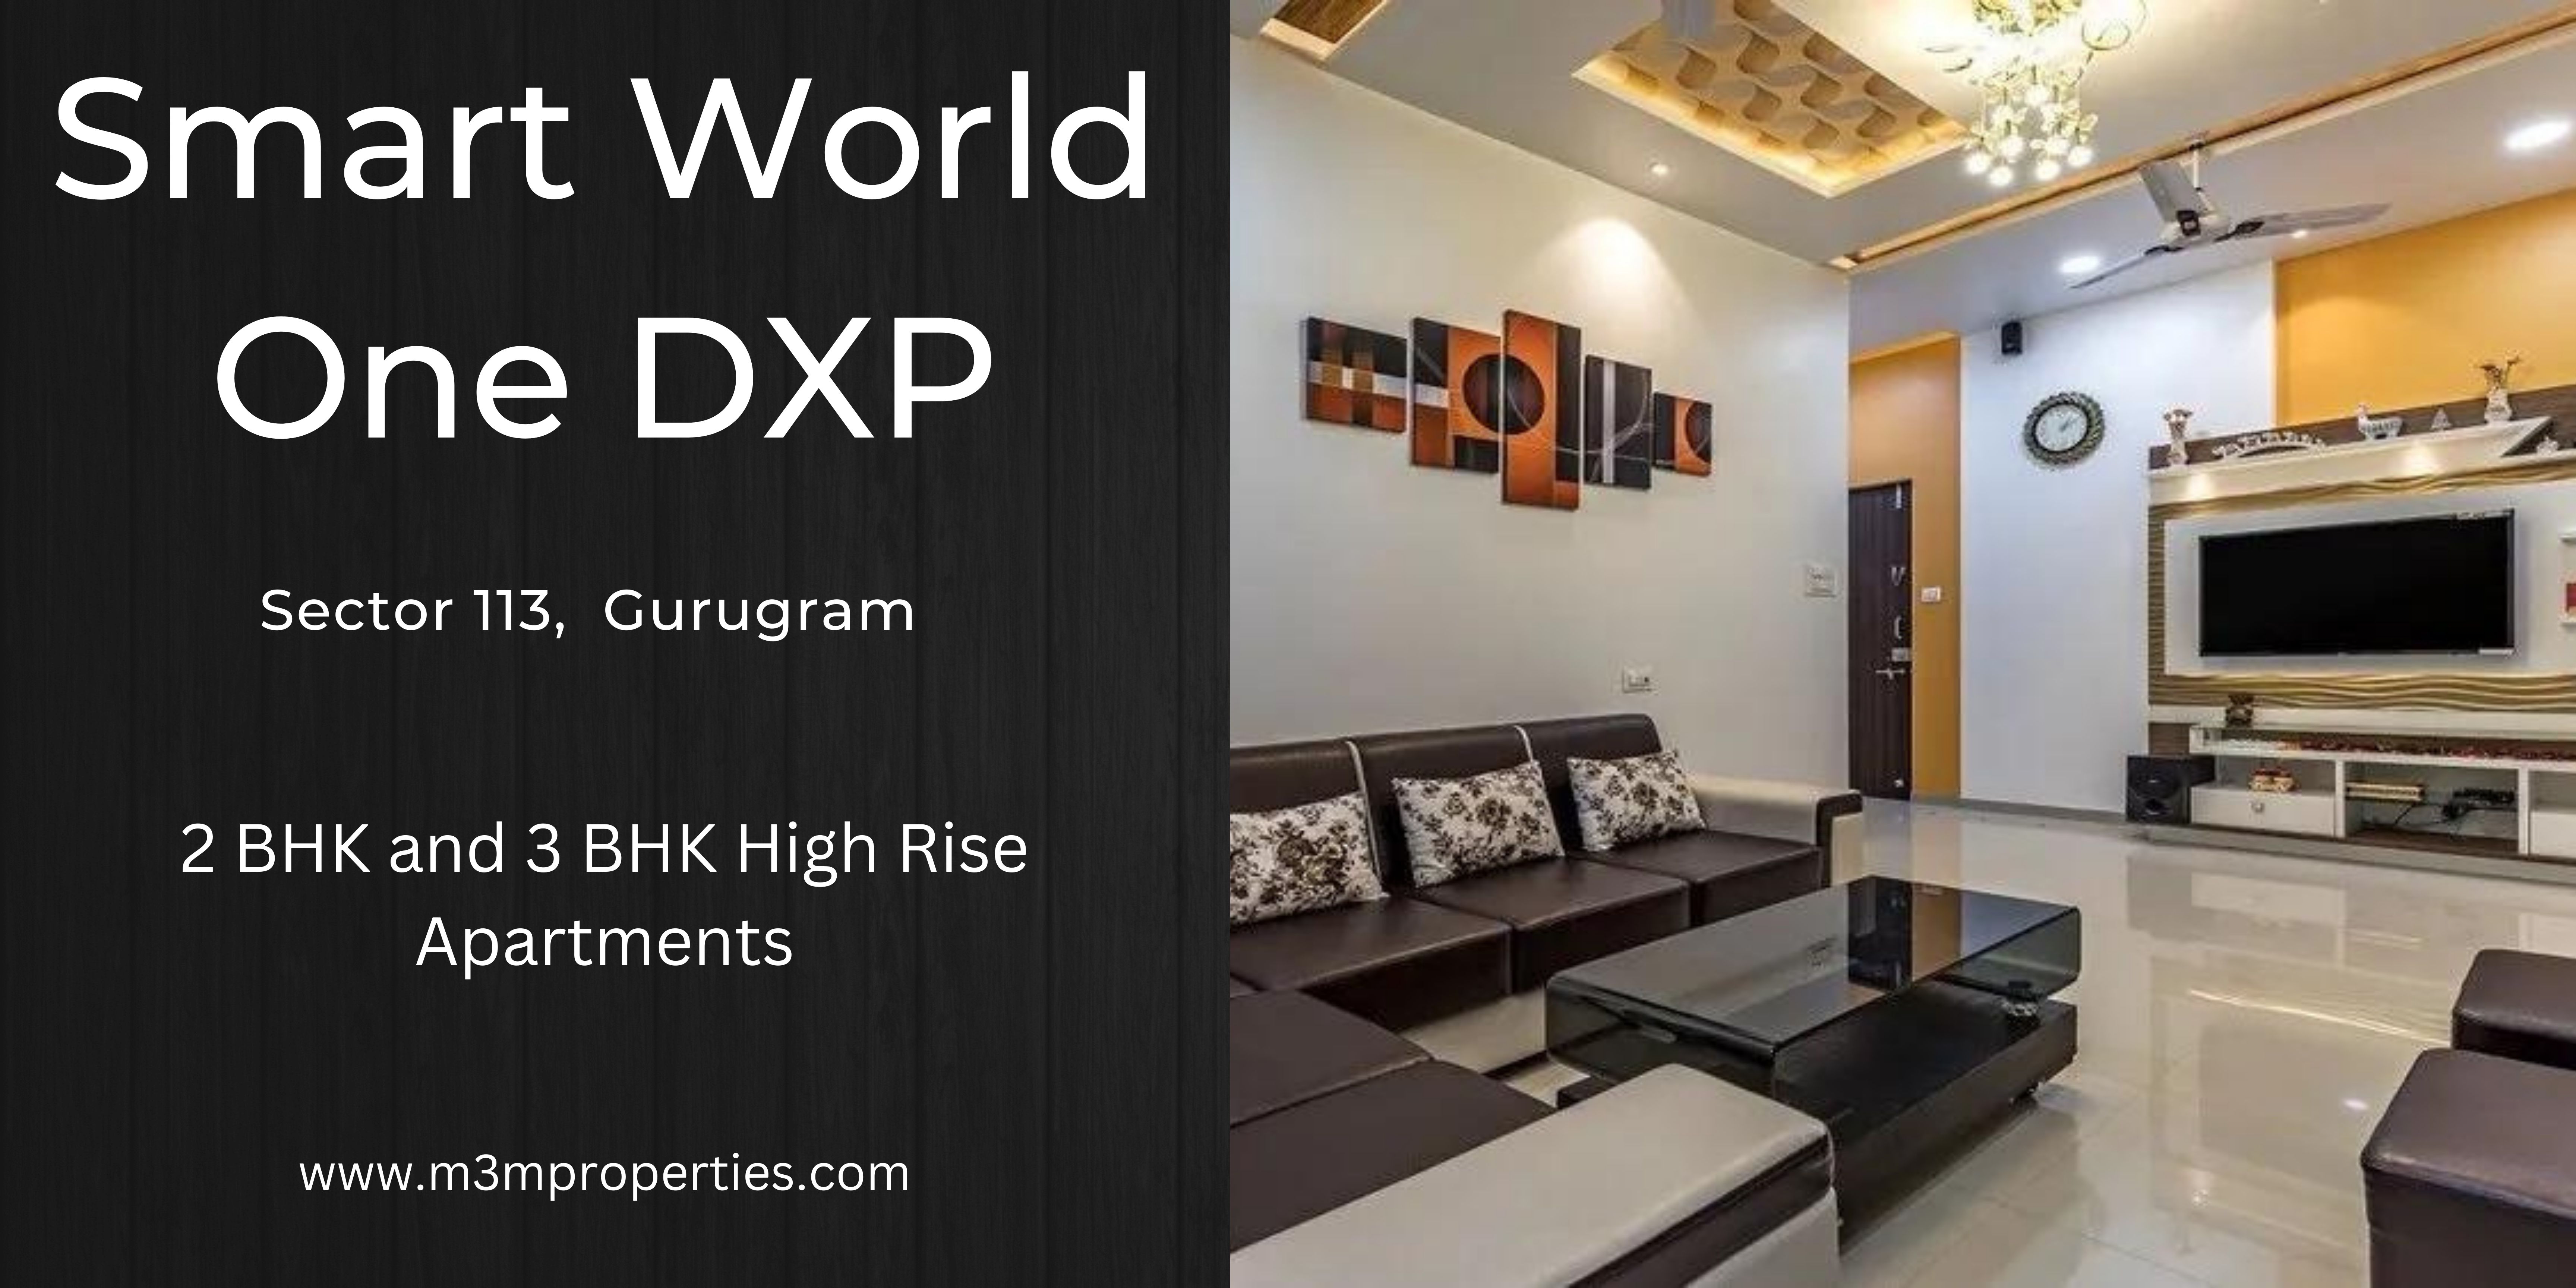 Smart World One DXP Sector 113 Gurgaon - Luxury Comes With A Conscience